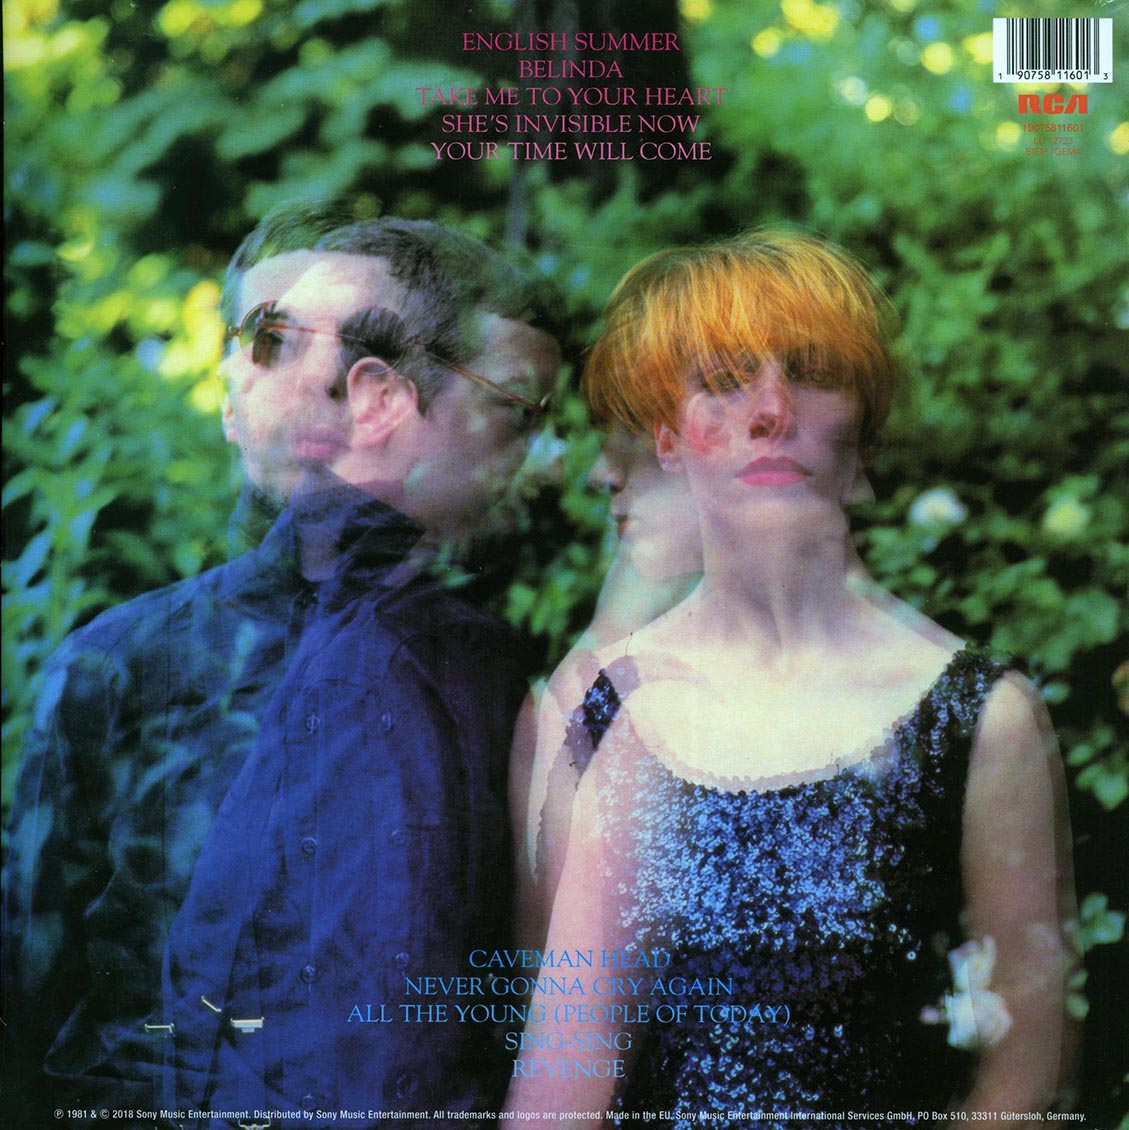 Eurythmics - In The Garden (incl wav) (incl mp3) (180g) (remastered) LP 190758116013